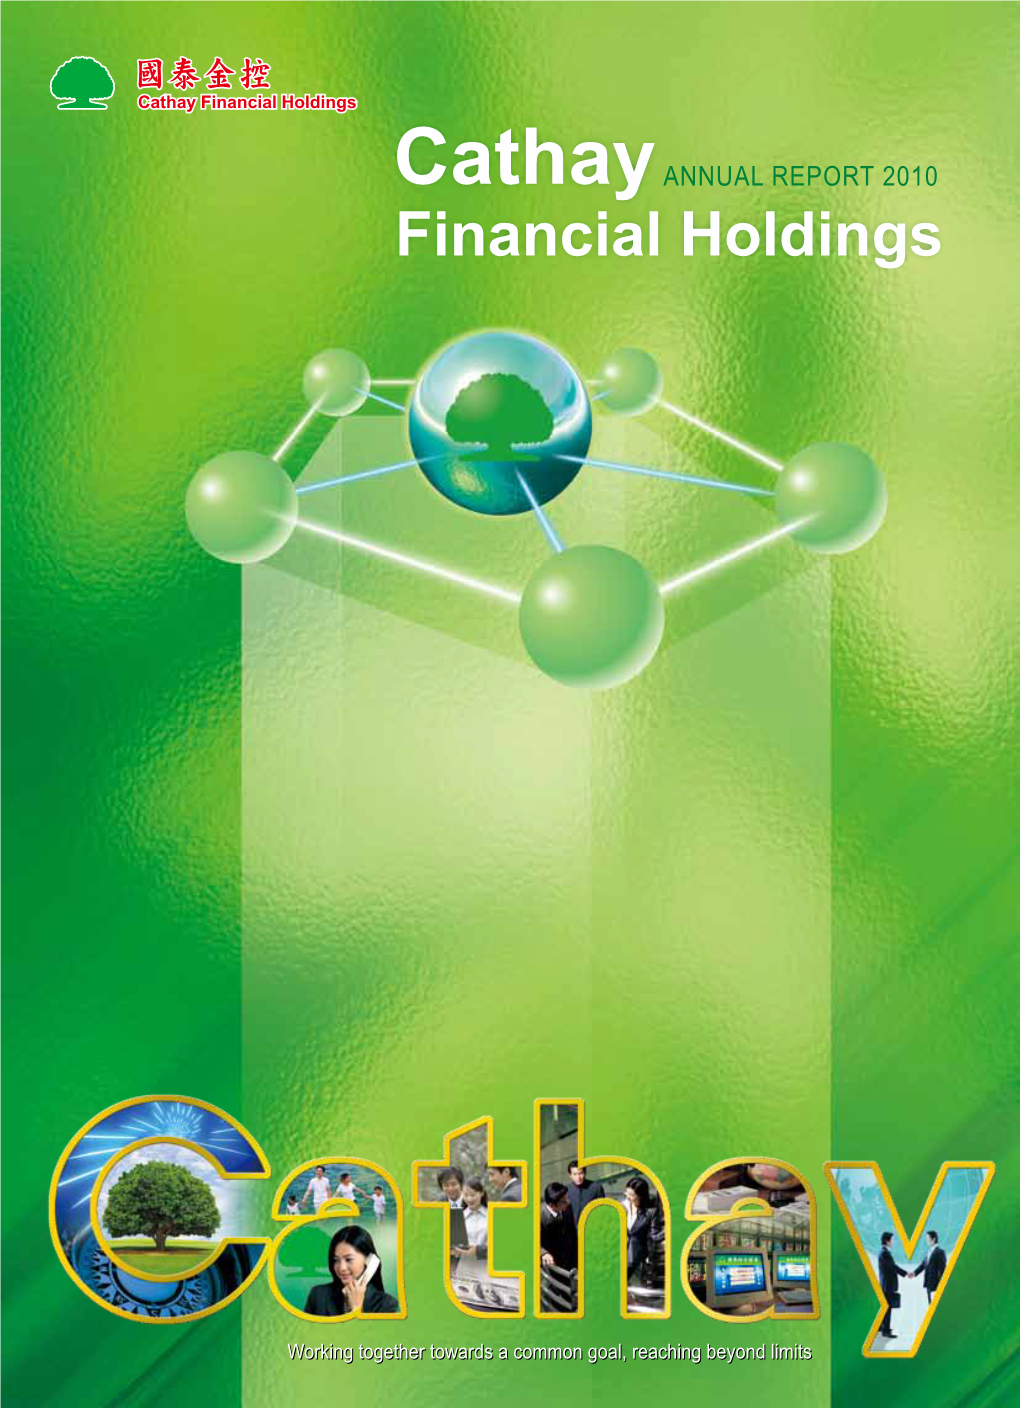 Cathay ANNUAL REPORT 2010 Financial Holdings